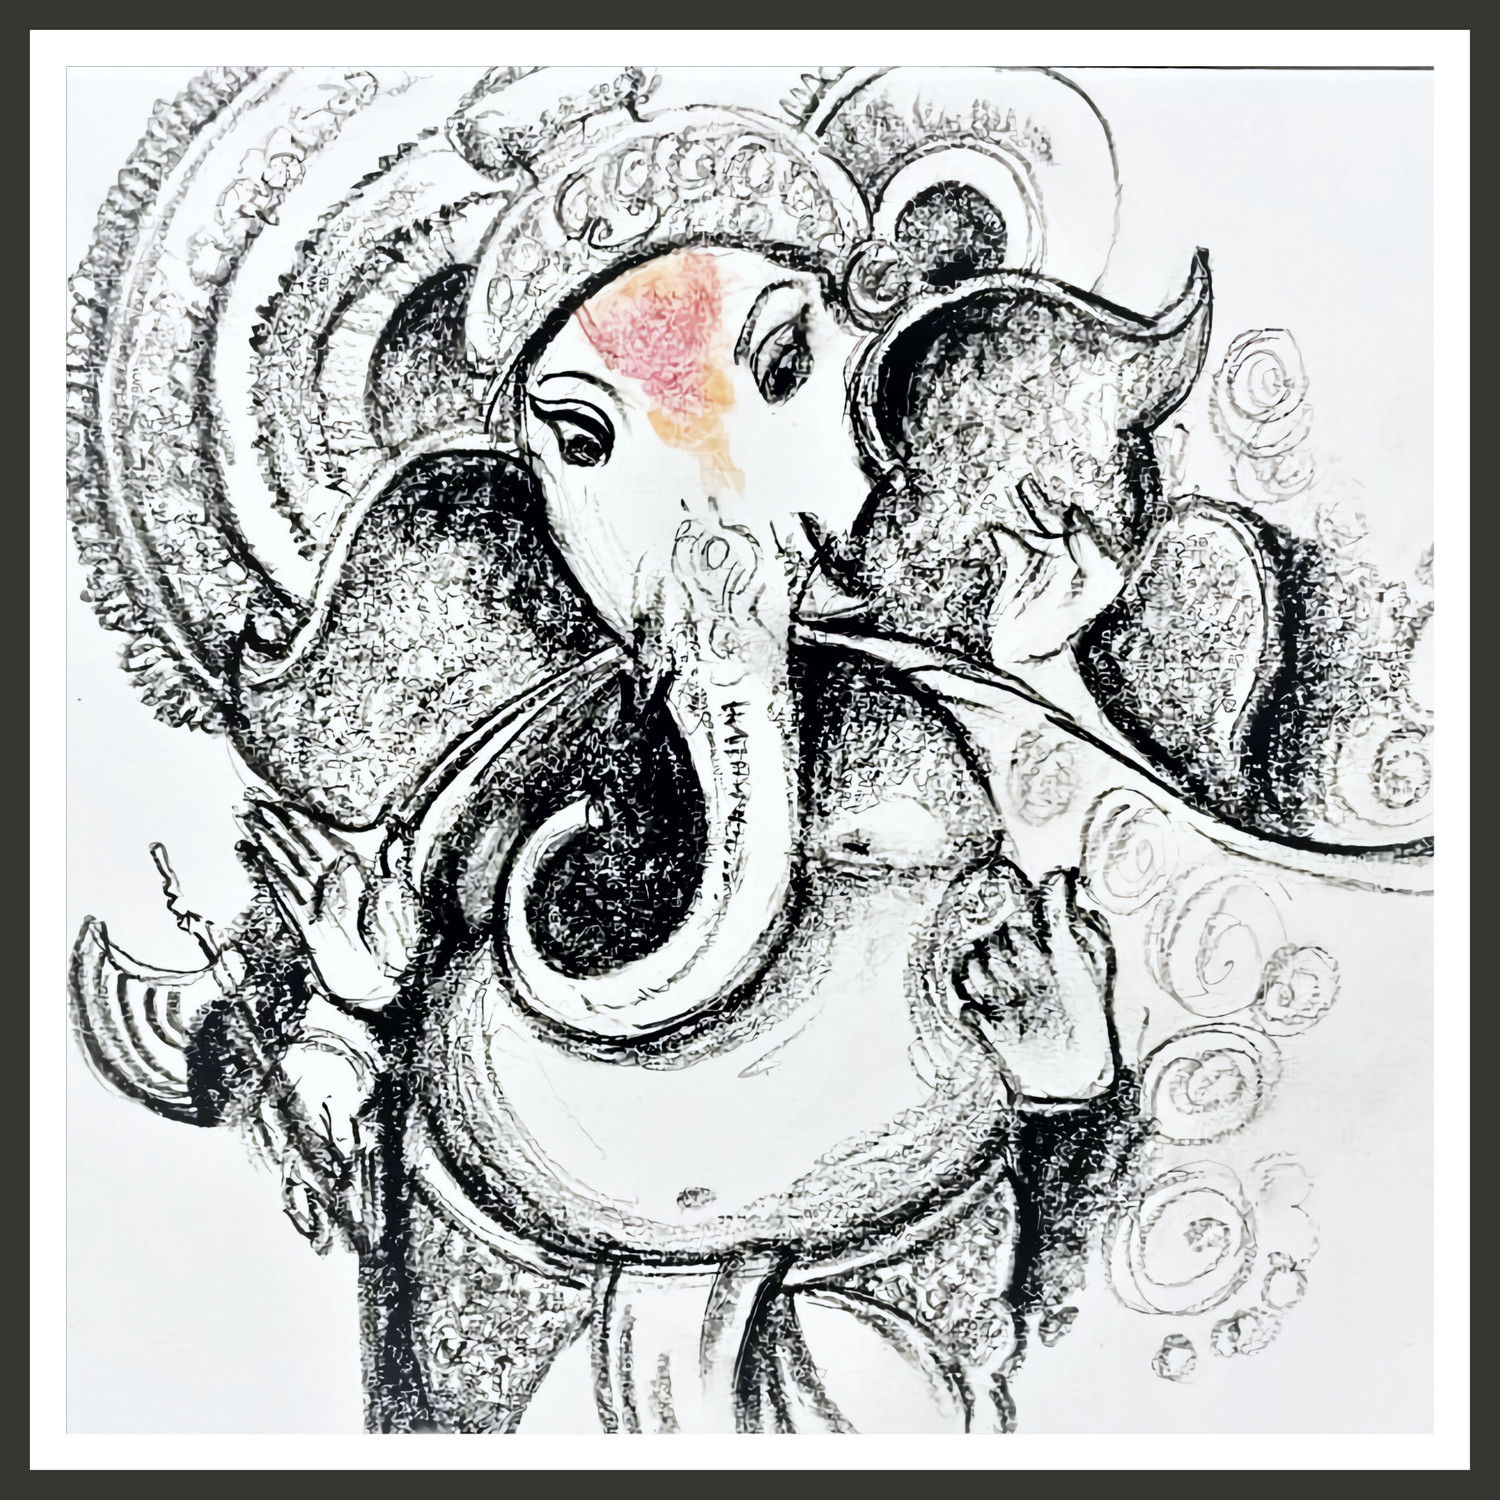 HOW TO DRAW GANPATI BAPPA SITTING DRAWING|GANESHA DRAWING STEP BY STEP  VIDEO BY @shailajashitole4856 - YouTube